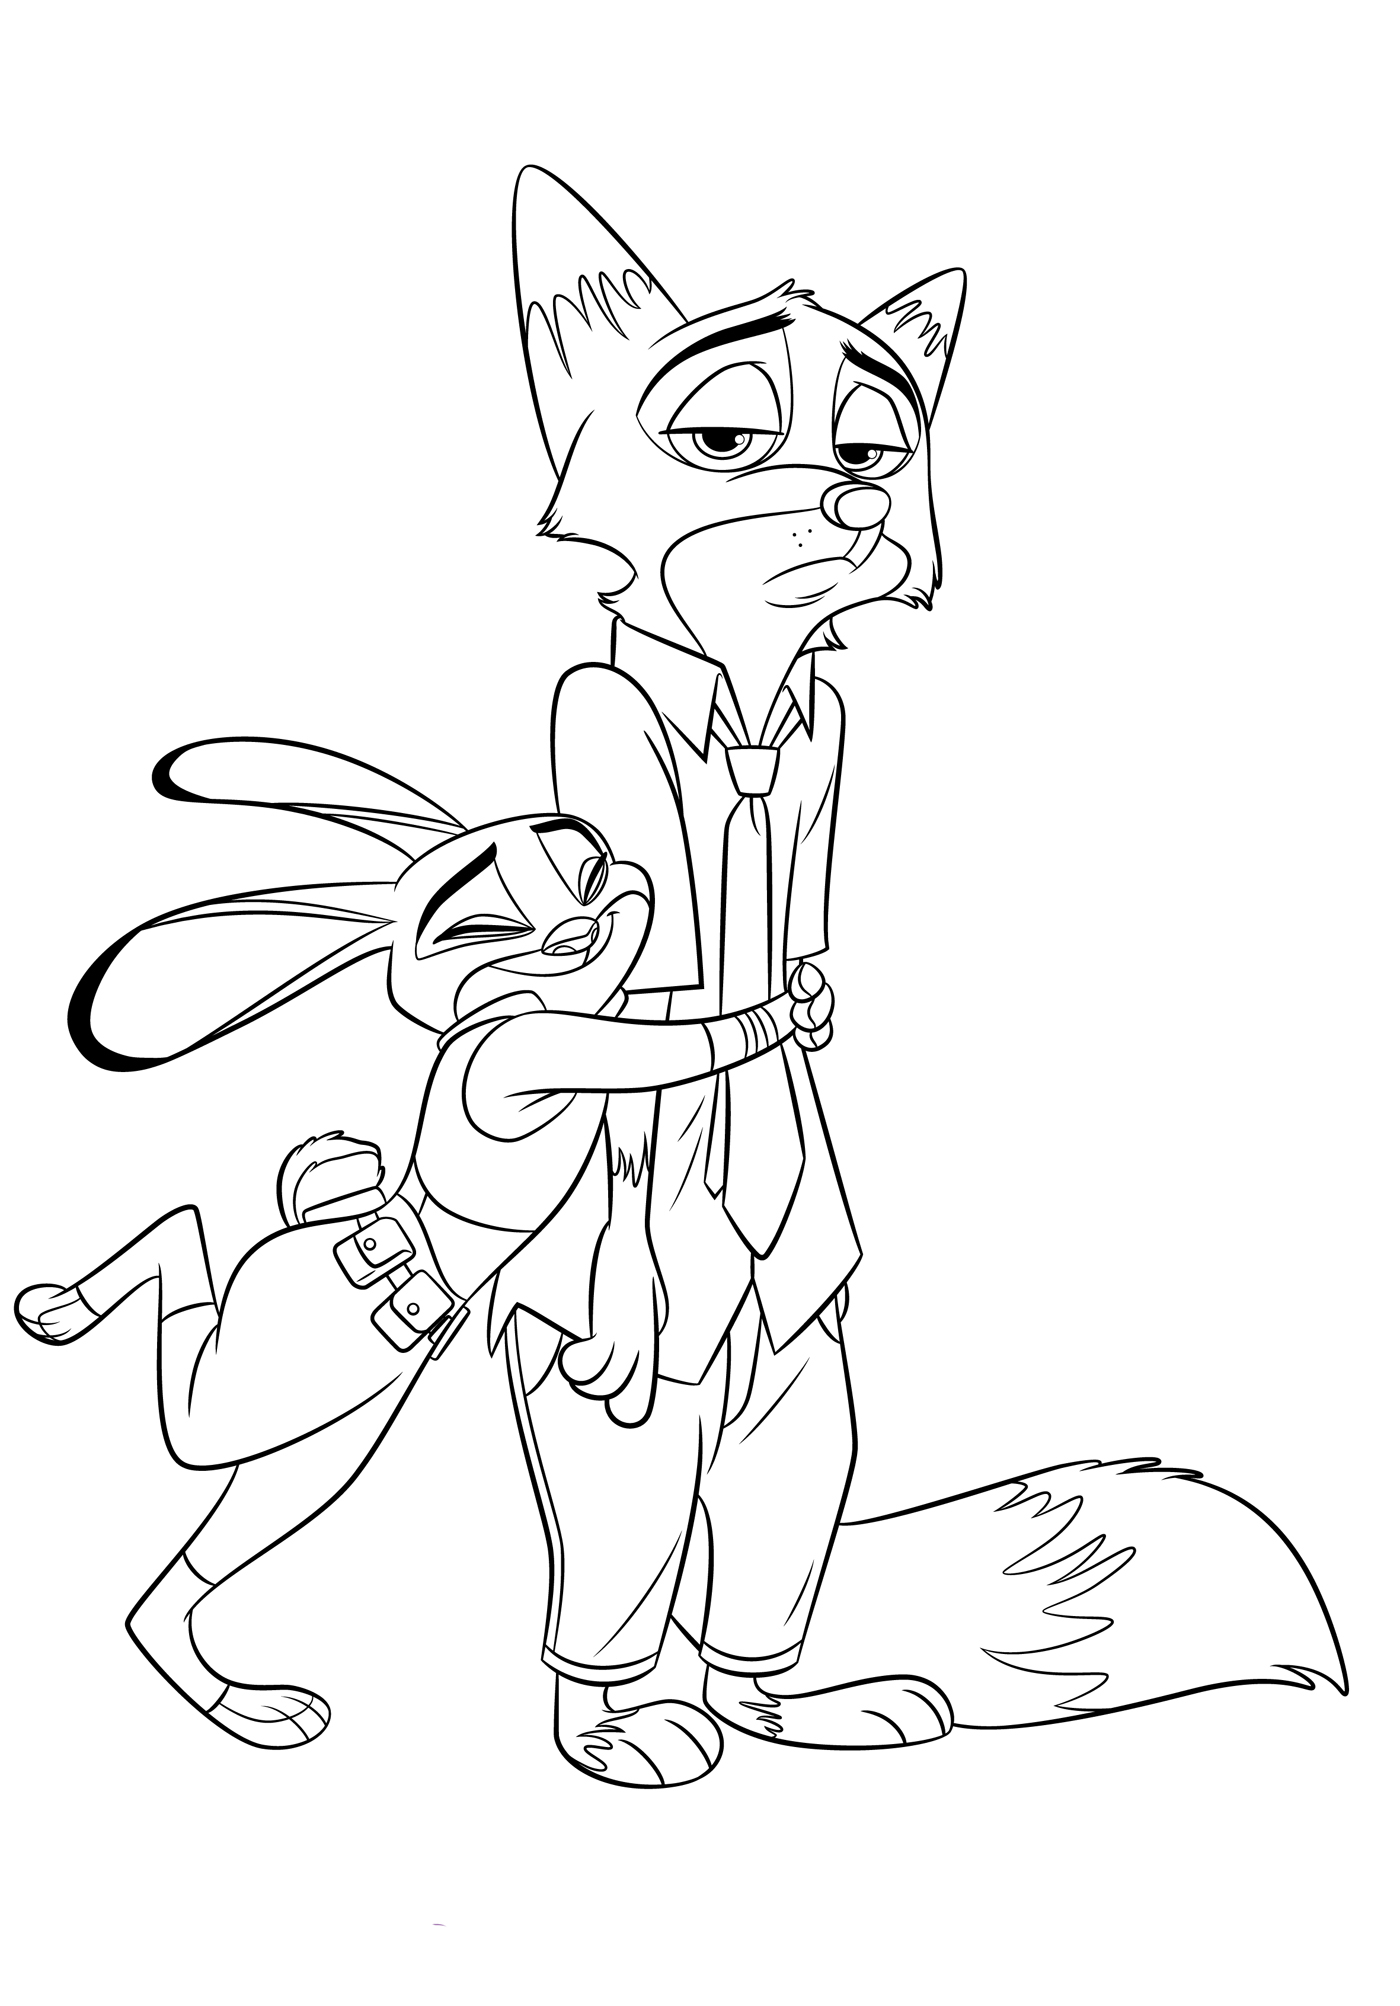 Zootopia coloring pages to download and print for free